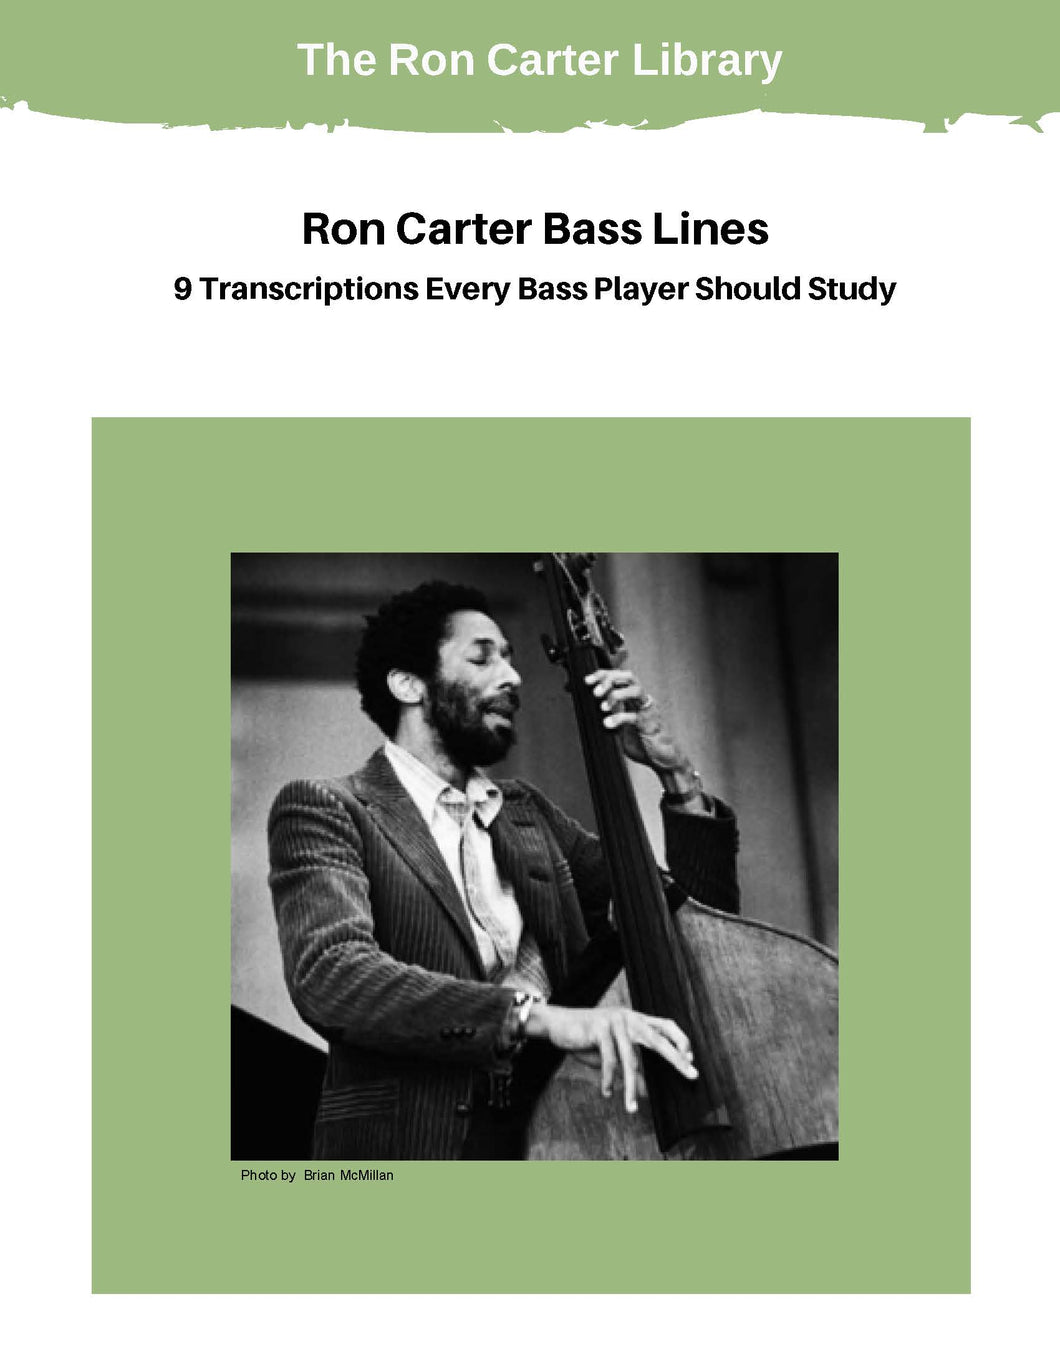 Ron Carter Bass Lines 9 Transcriptions Every Bass Player Should Study part of the Ron Carter Library